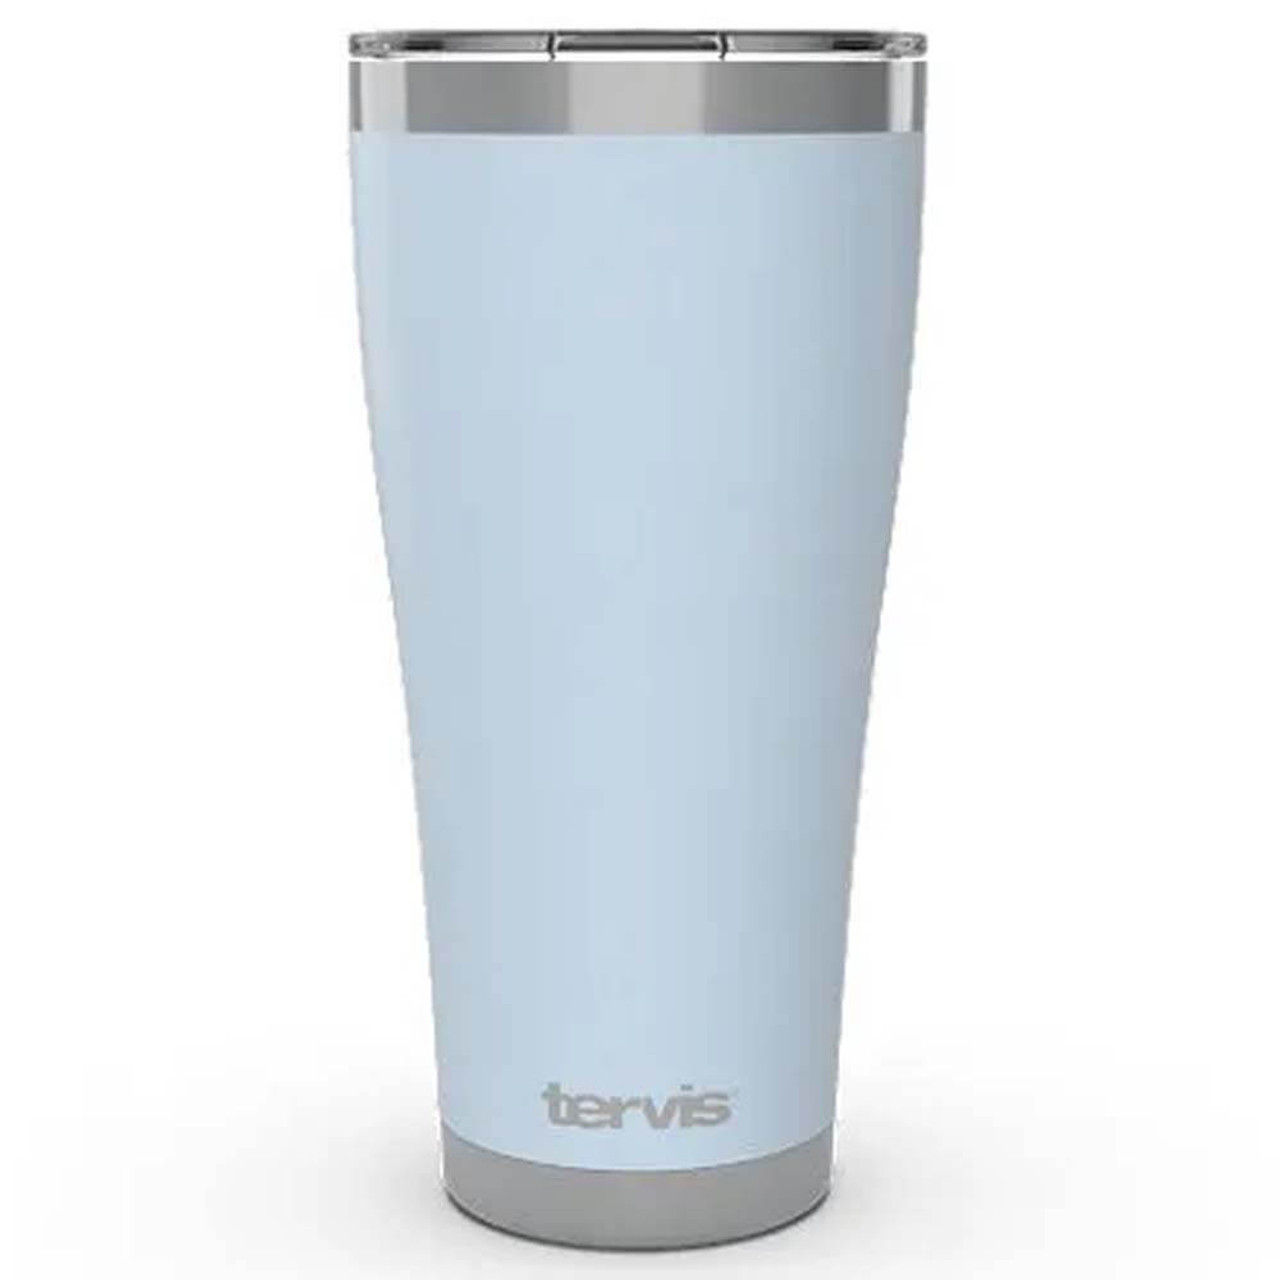 https://cdn11.bigcommerce.com/s-zut1msomd6/images/stencil/1280x1280/products/26293/209921/tervis-30oz-stainless-tumbler-blue-moon-powder-coated-1346931-BLUEMOON__31596.1646260733.jpg?c=1